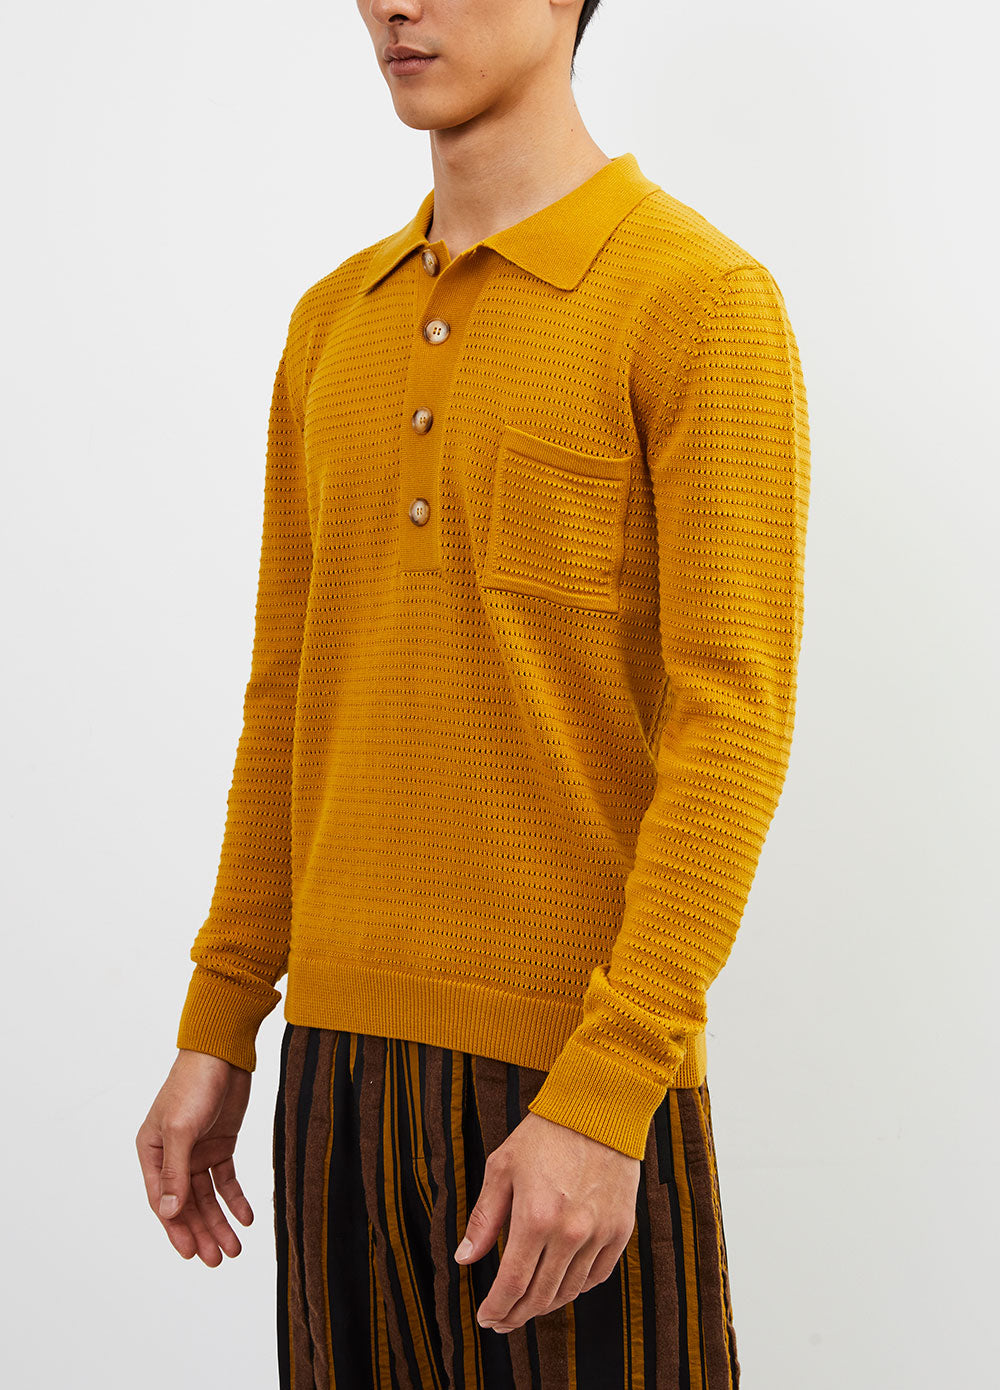 Curtis Knitted Polo Shirt